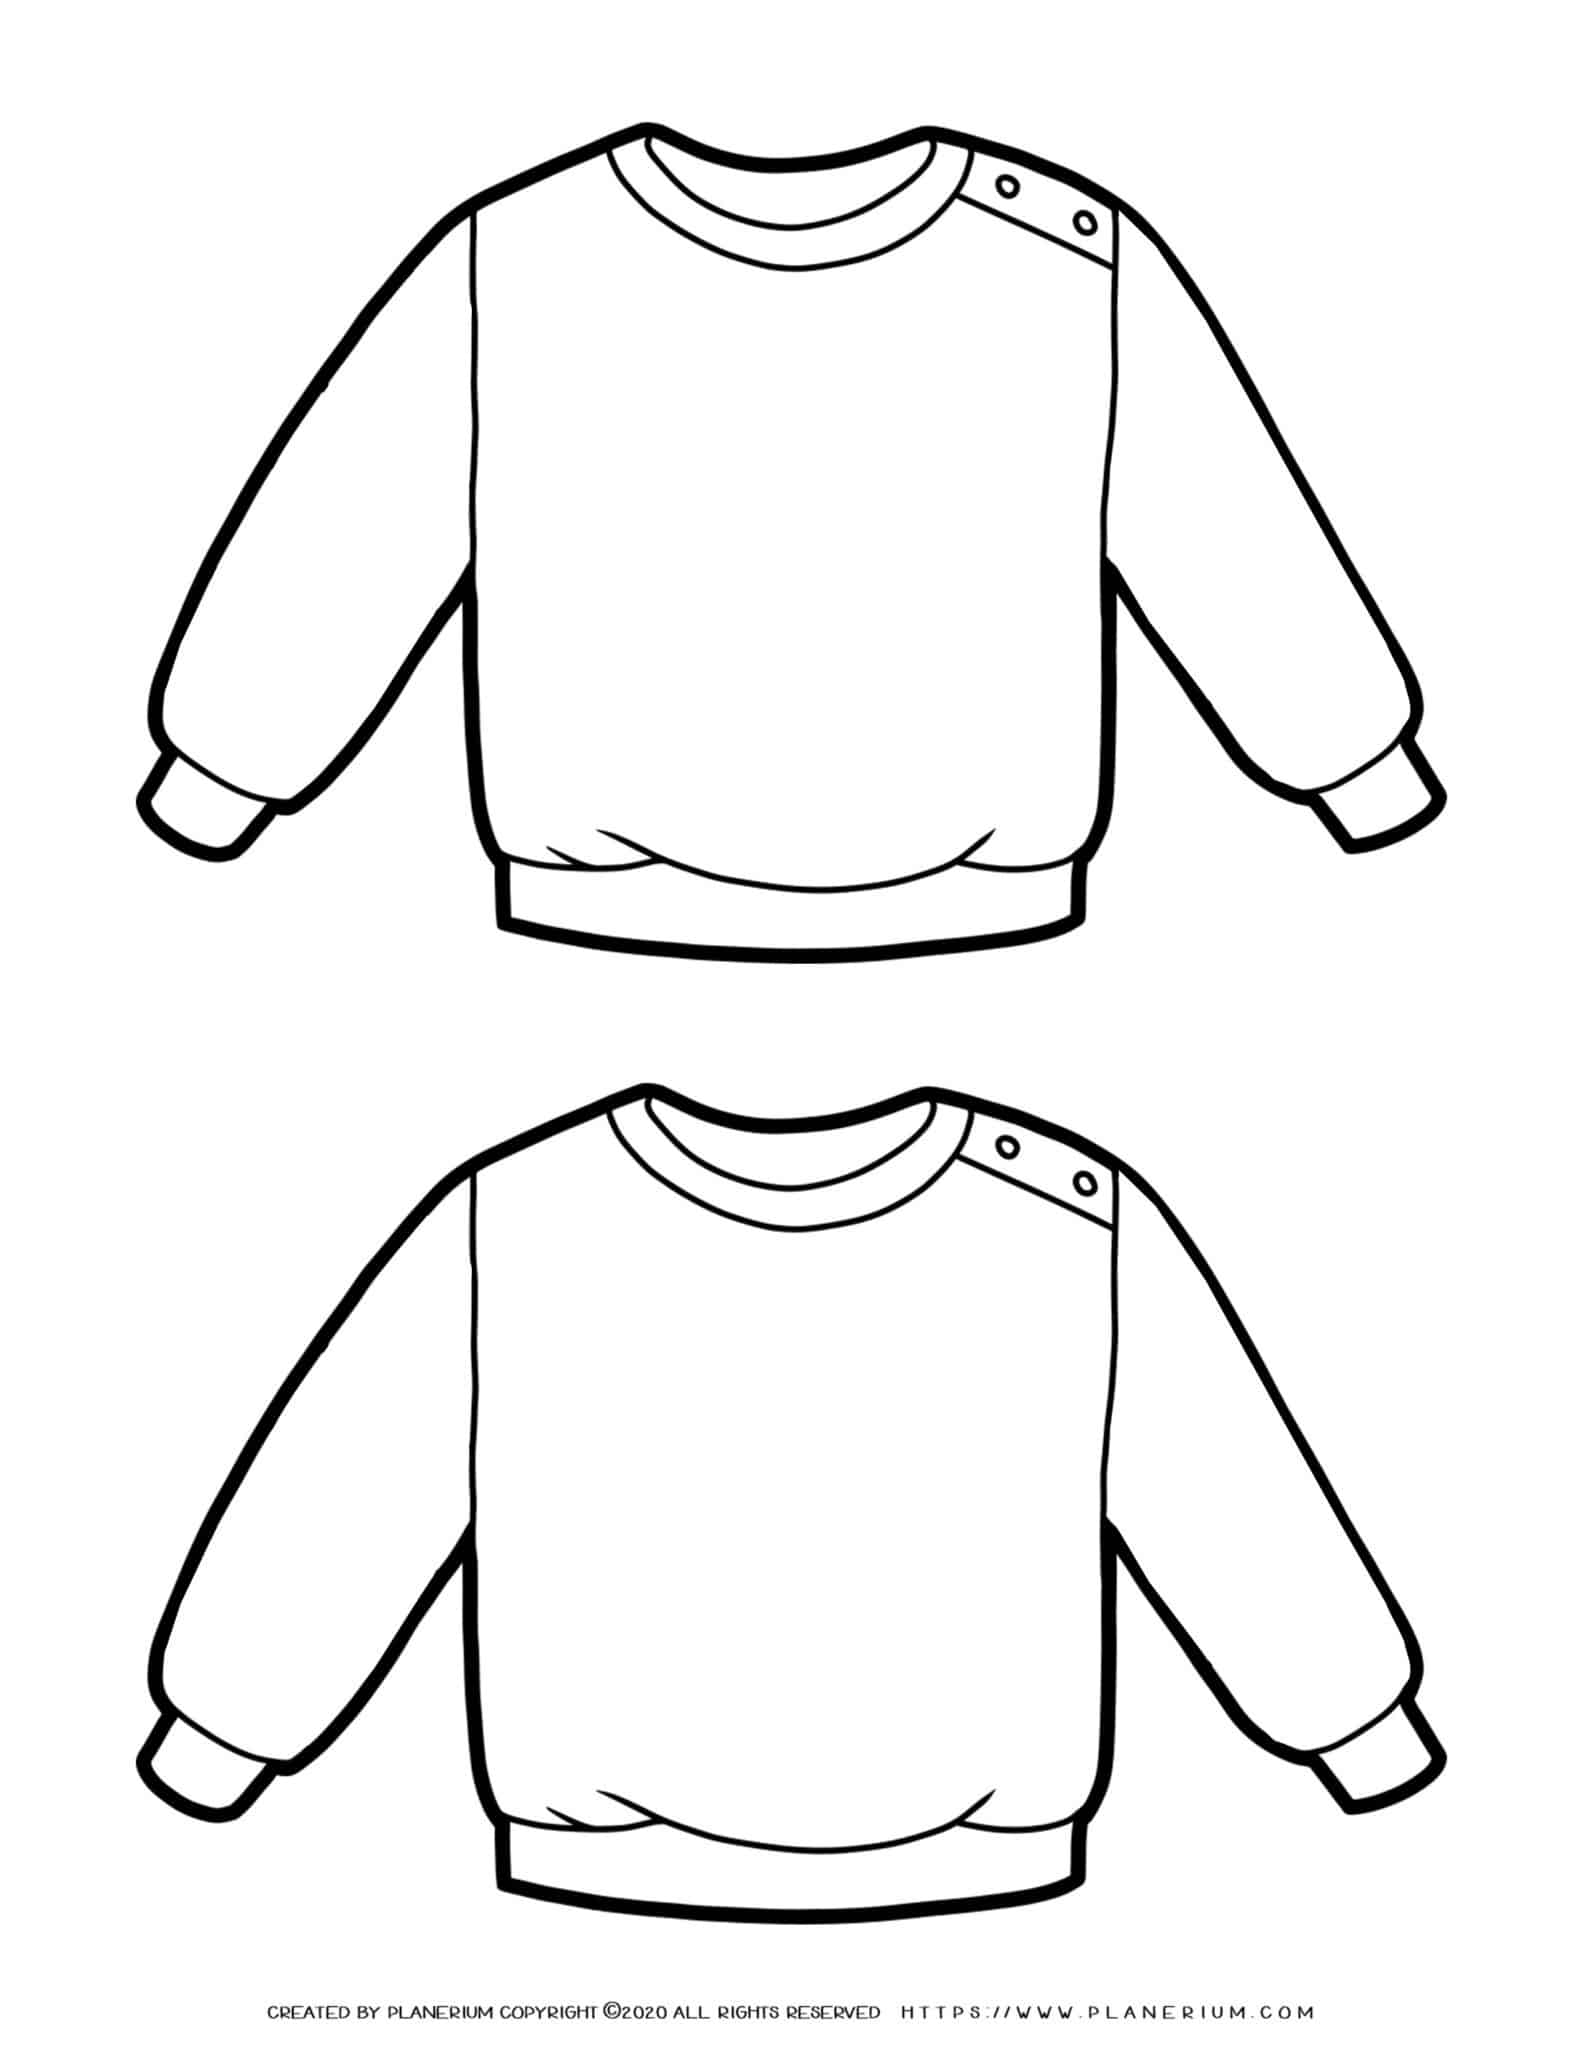 two-sweaters-template-planerium